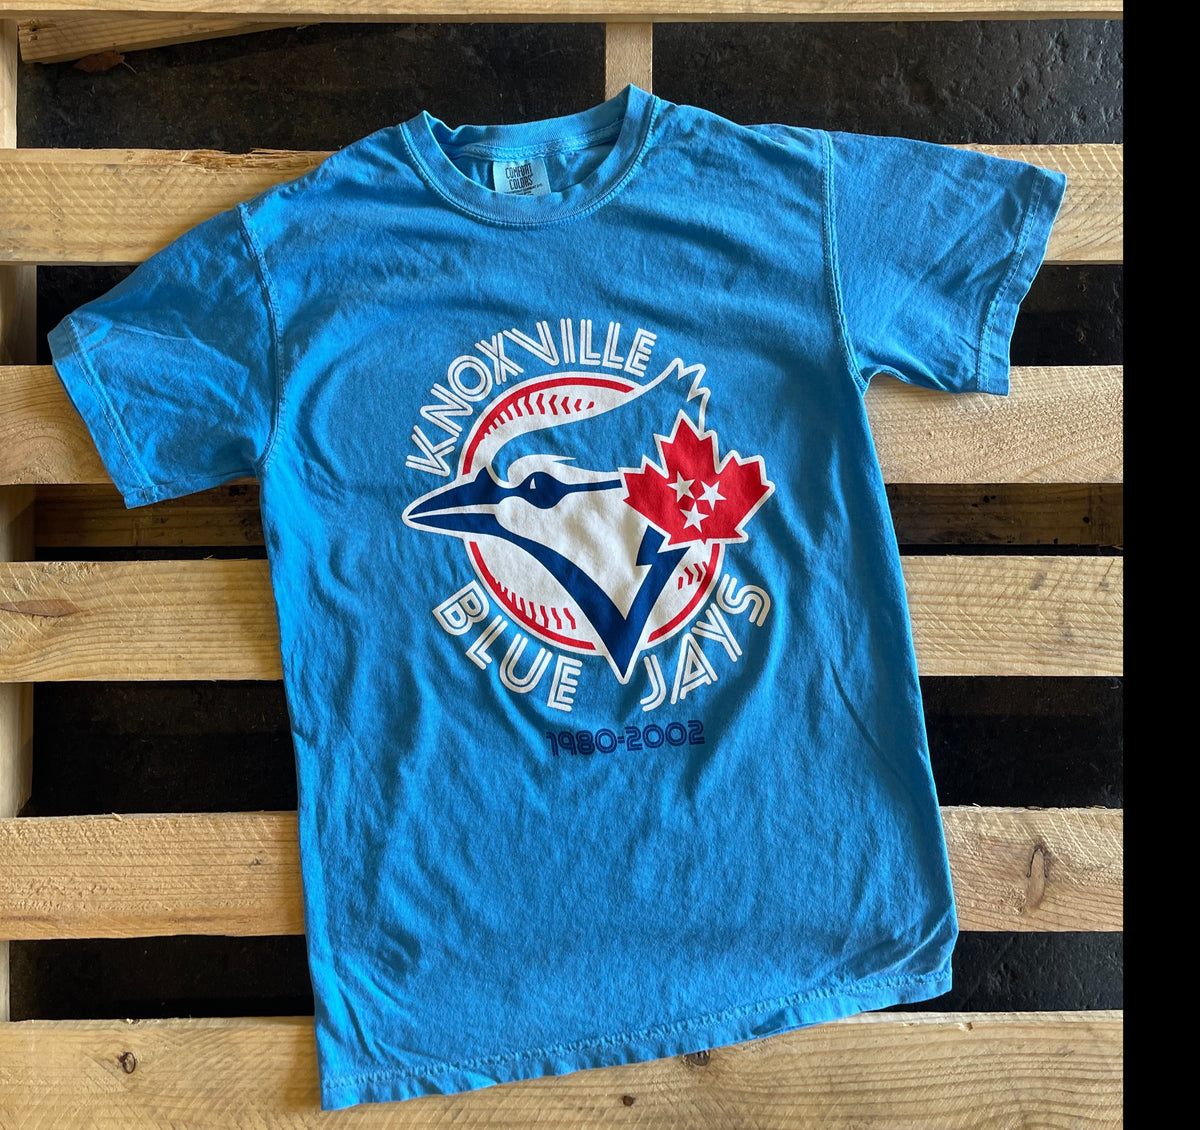 Knoxville Blue Jays T-Shirt – Made in Tennessee Apparel Co.